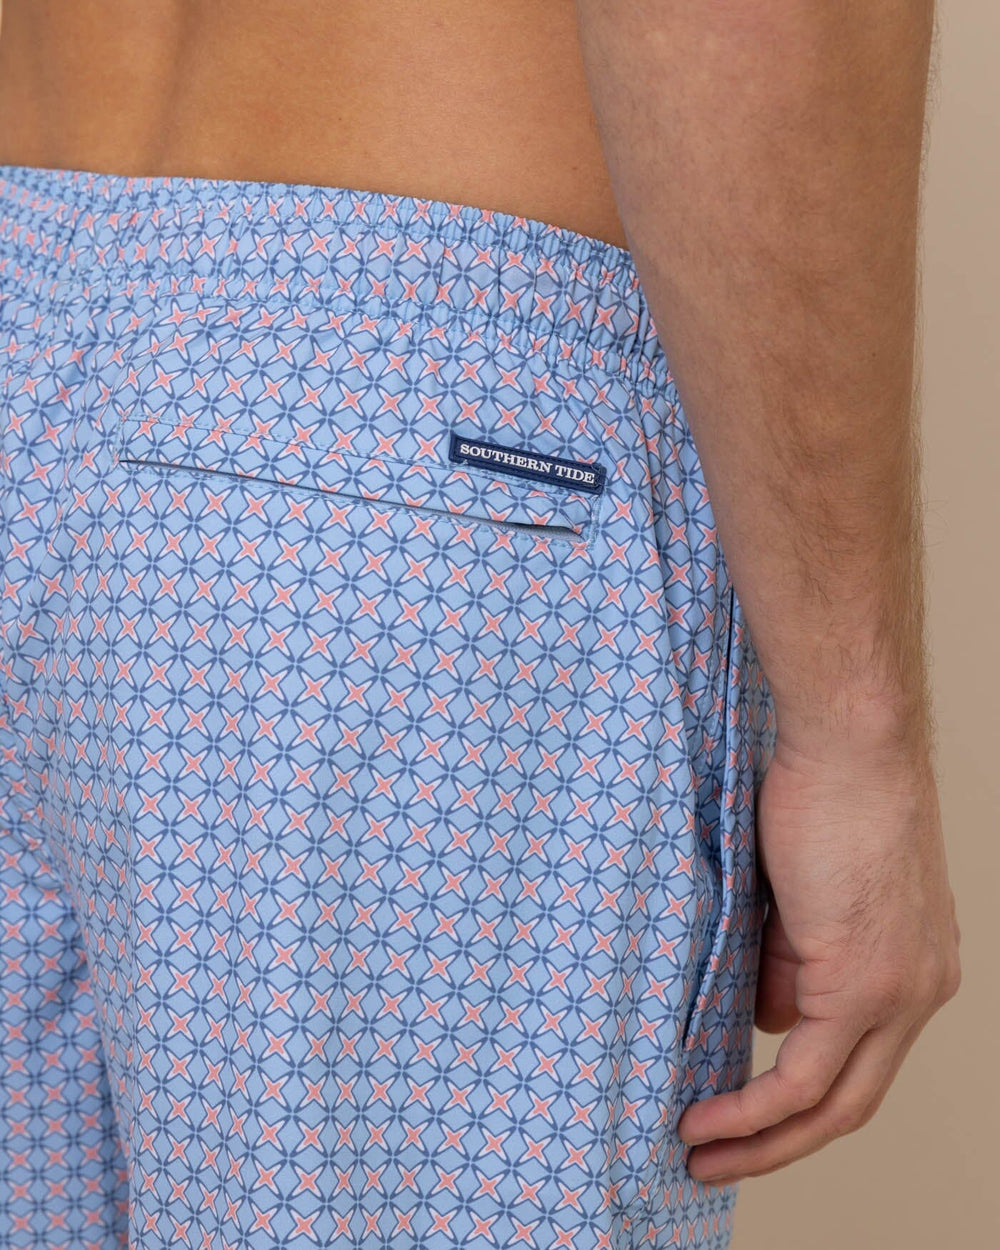 The detail view of the Southern Tide White Lotus Swim Trunk by Southern Tide - Clearwater Blue